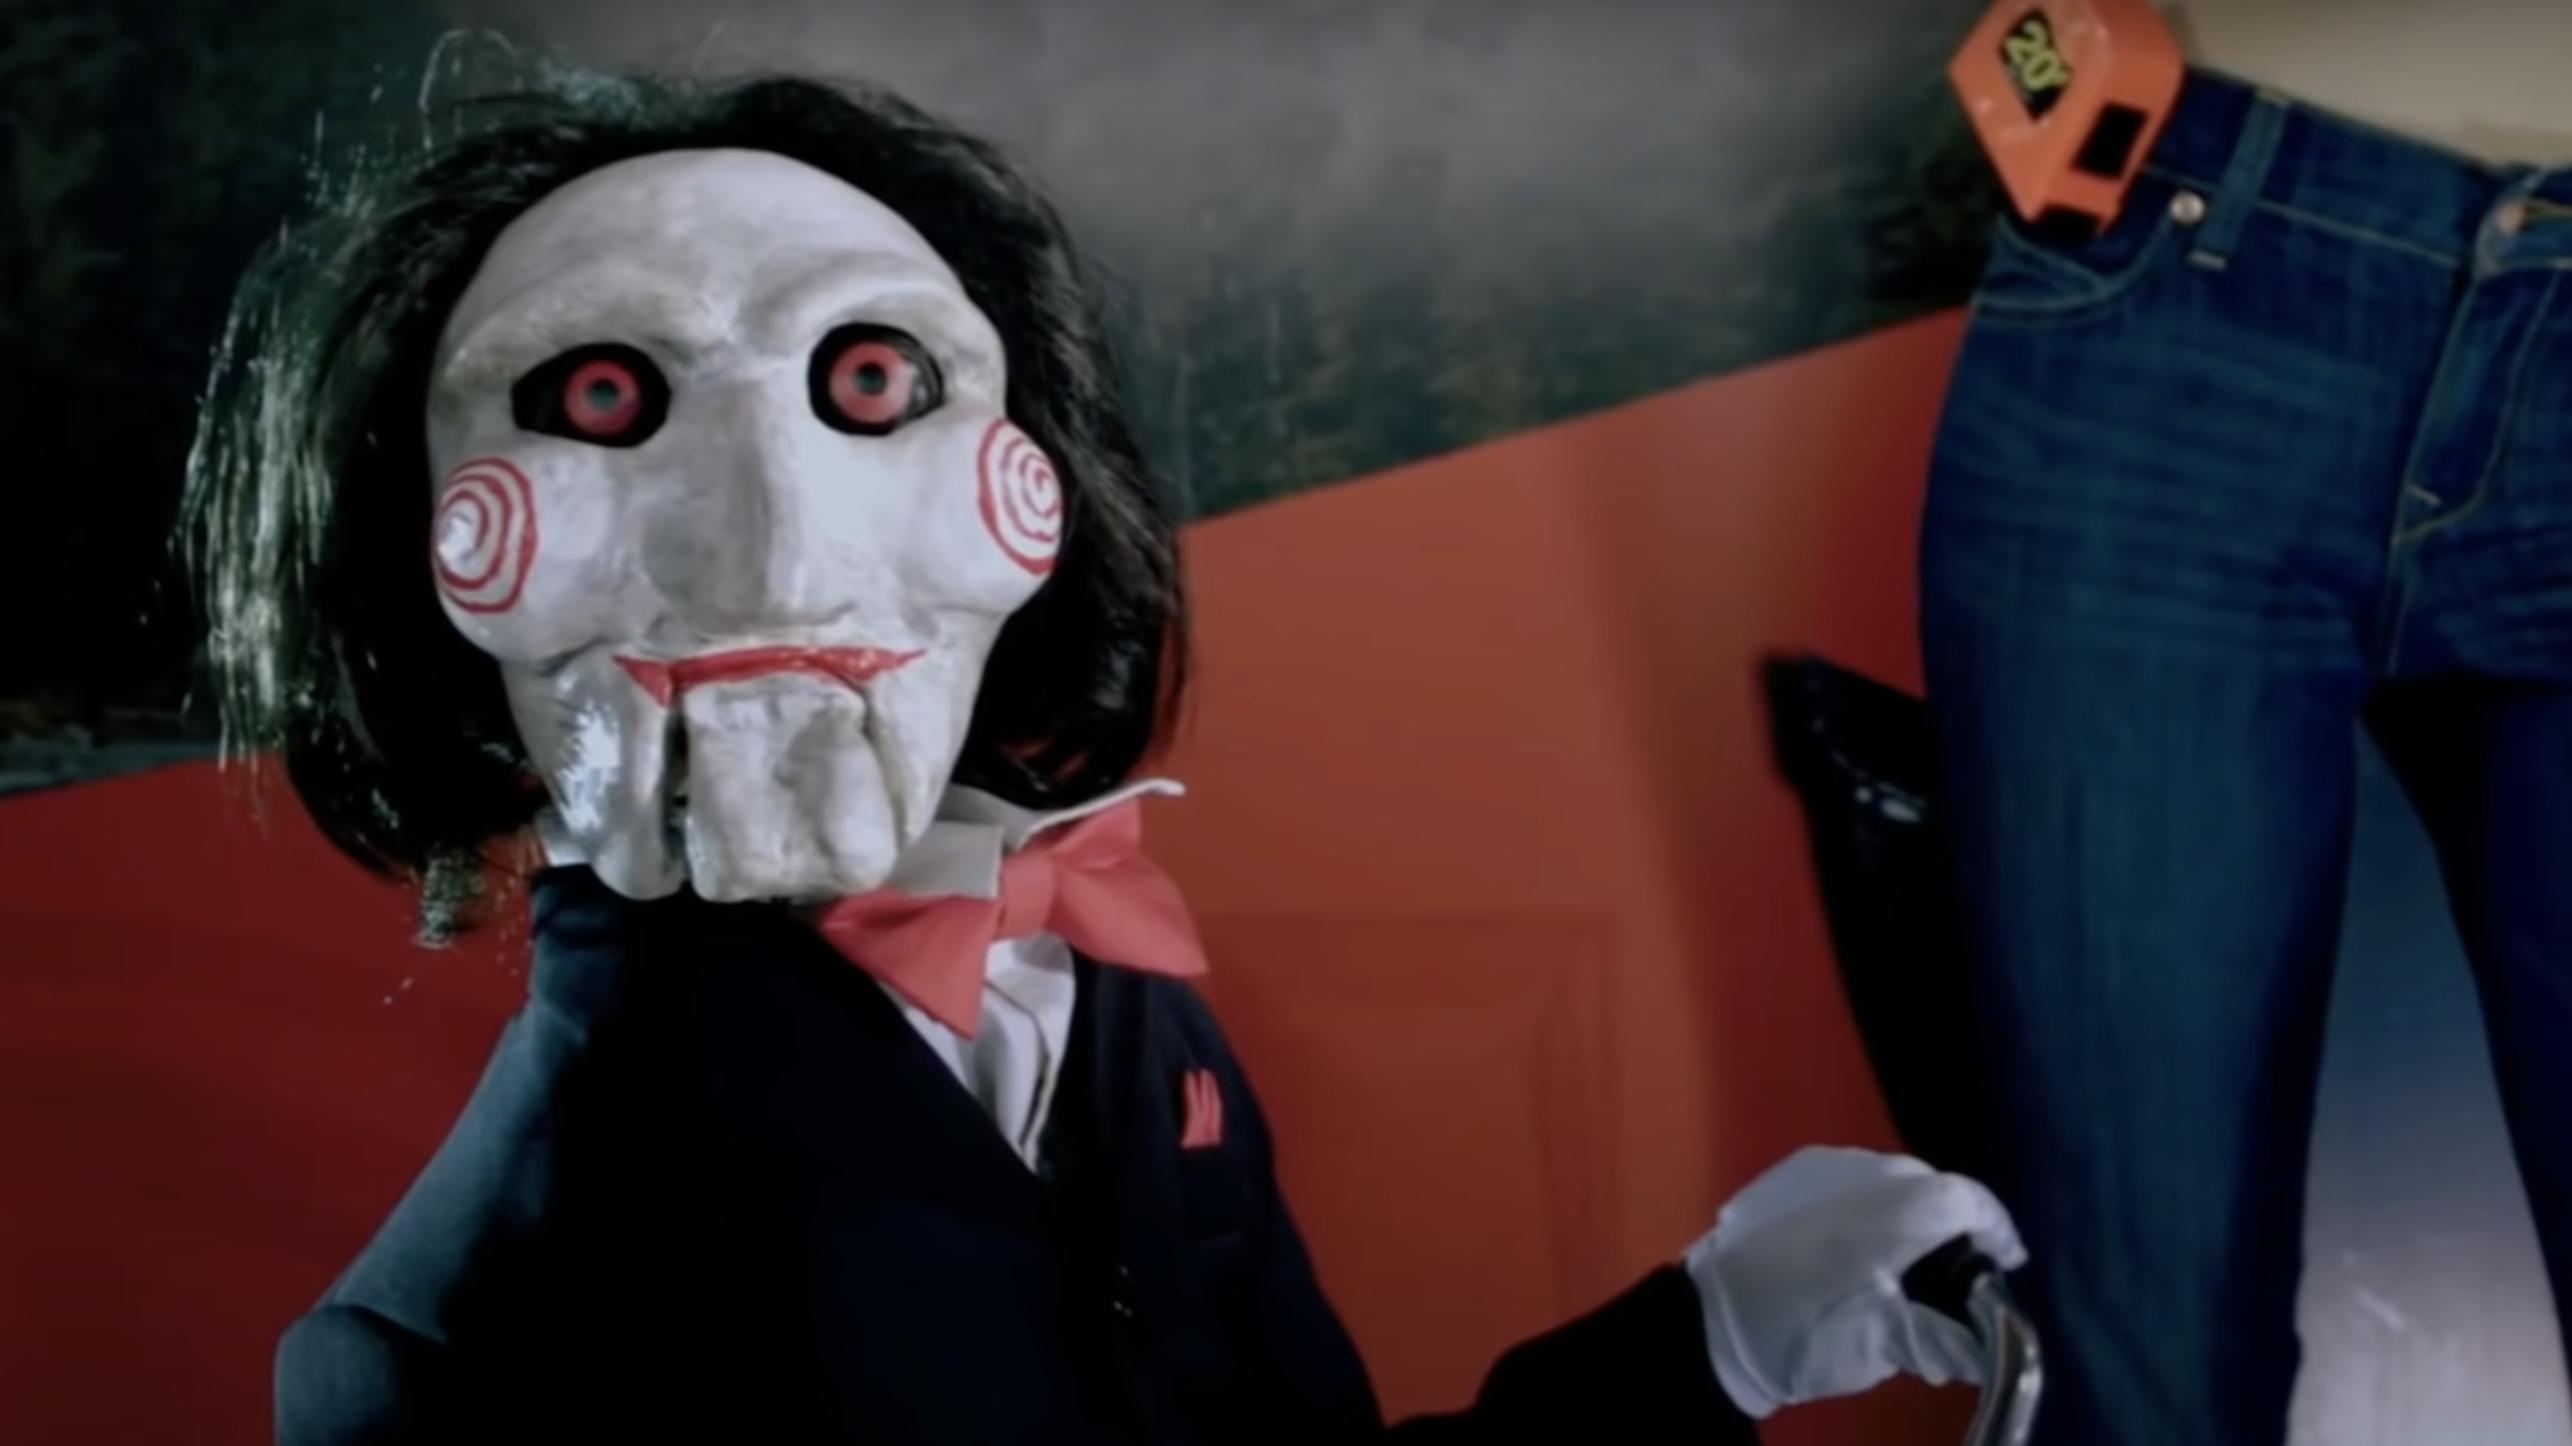 is jigsaw before or after saw? 2